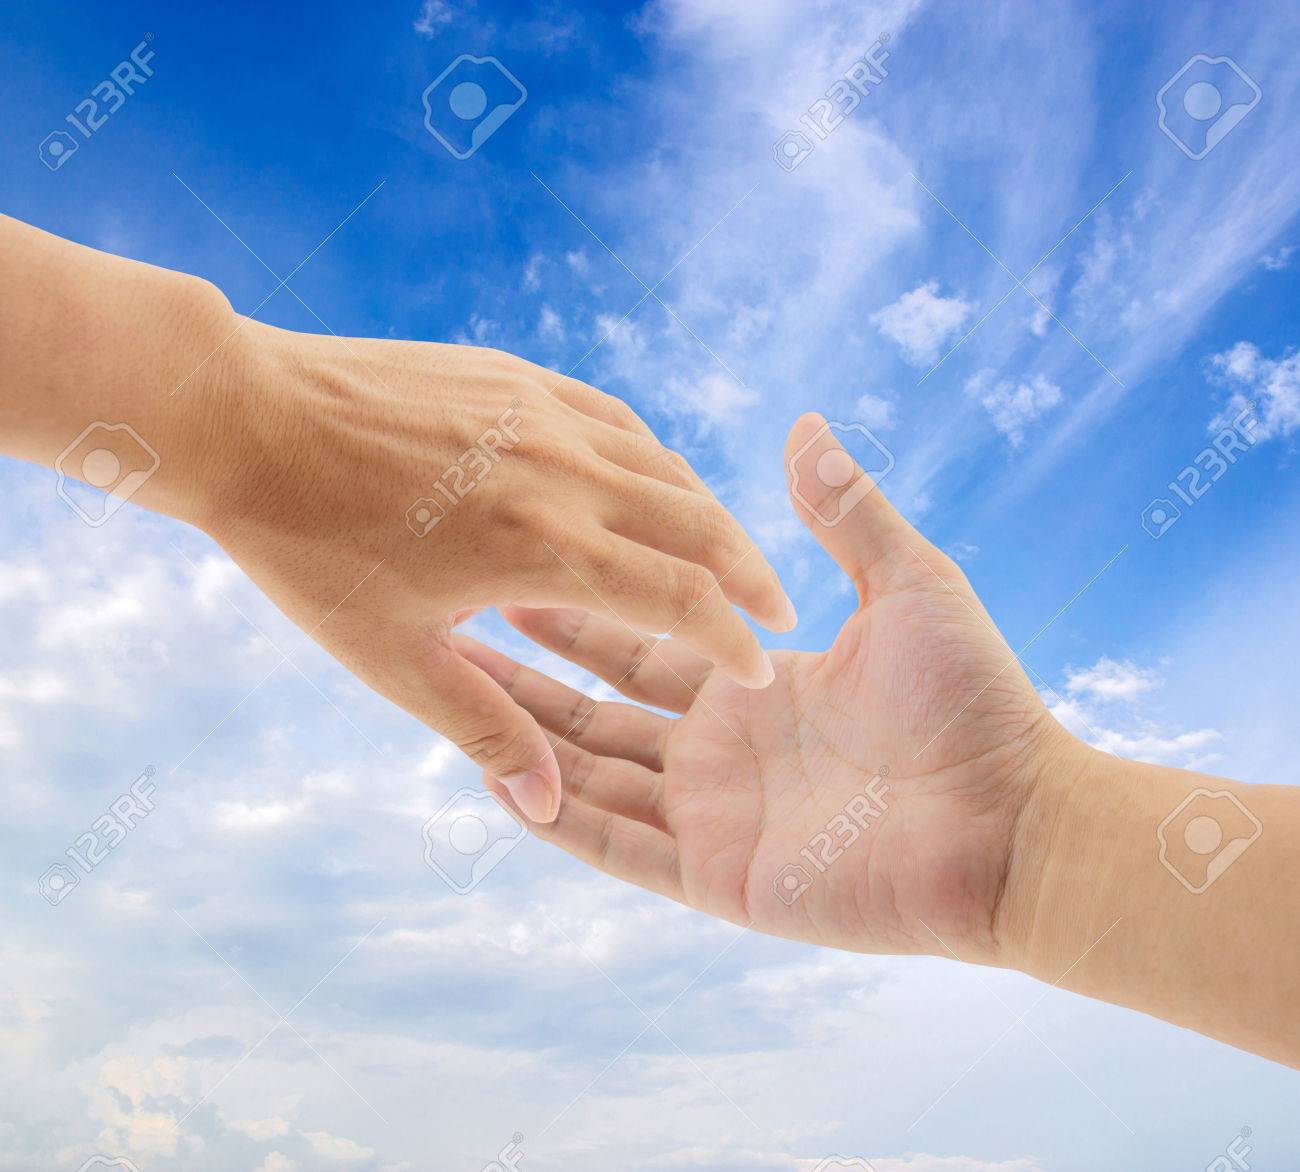 Helping Hands On Sky Background Stock Photo Picture And Royalty